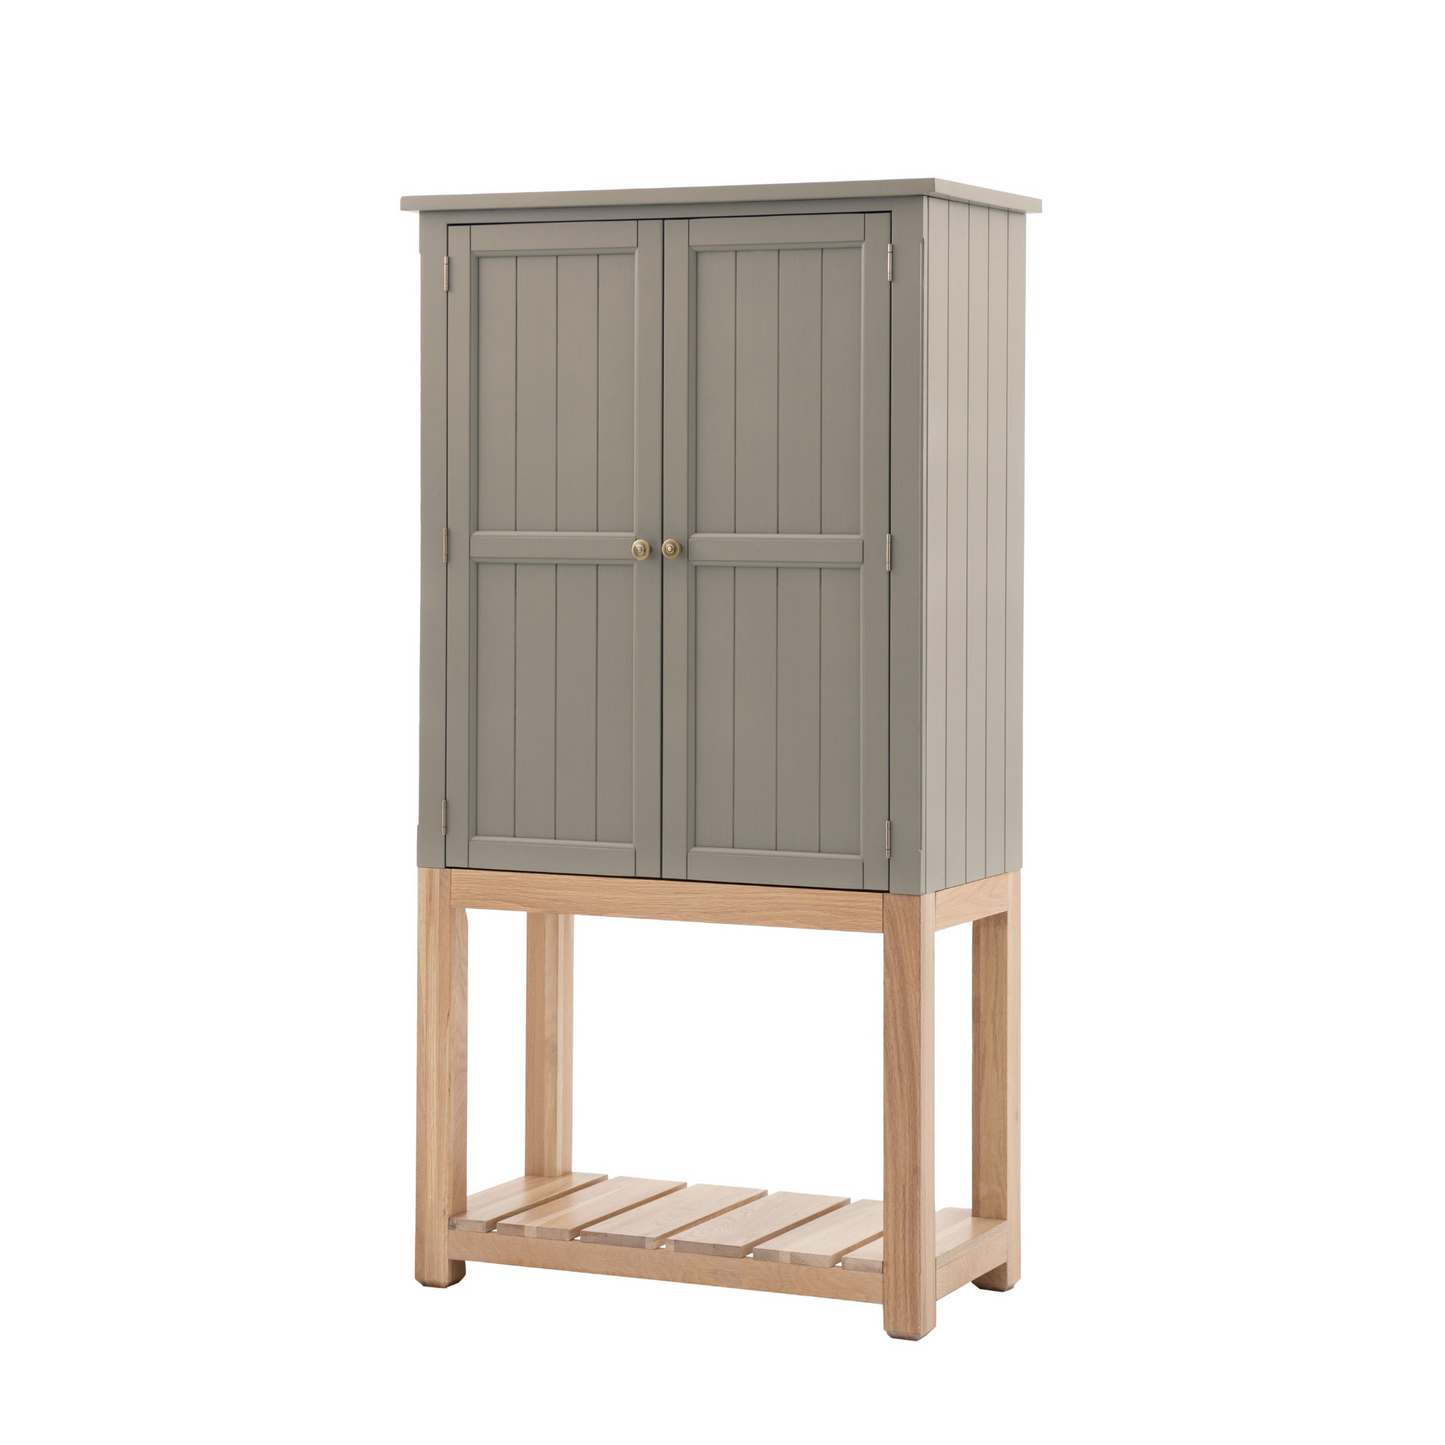 Load image into Gallery viewer, A Buckland 2 Door Storage Cupboard in Prairie with a wooden shelf, perfect for interior decor and home furniture.
